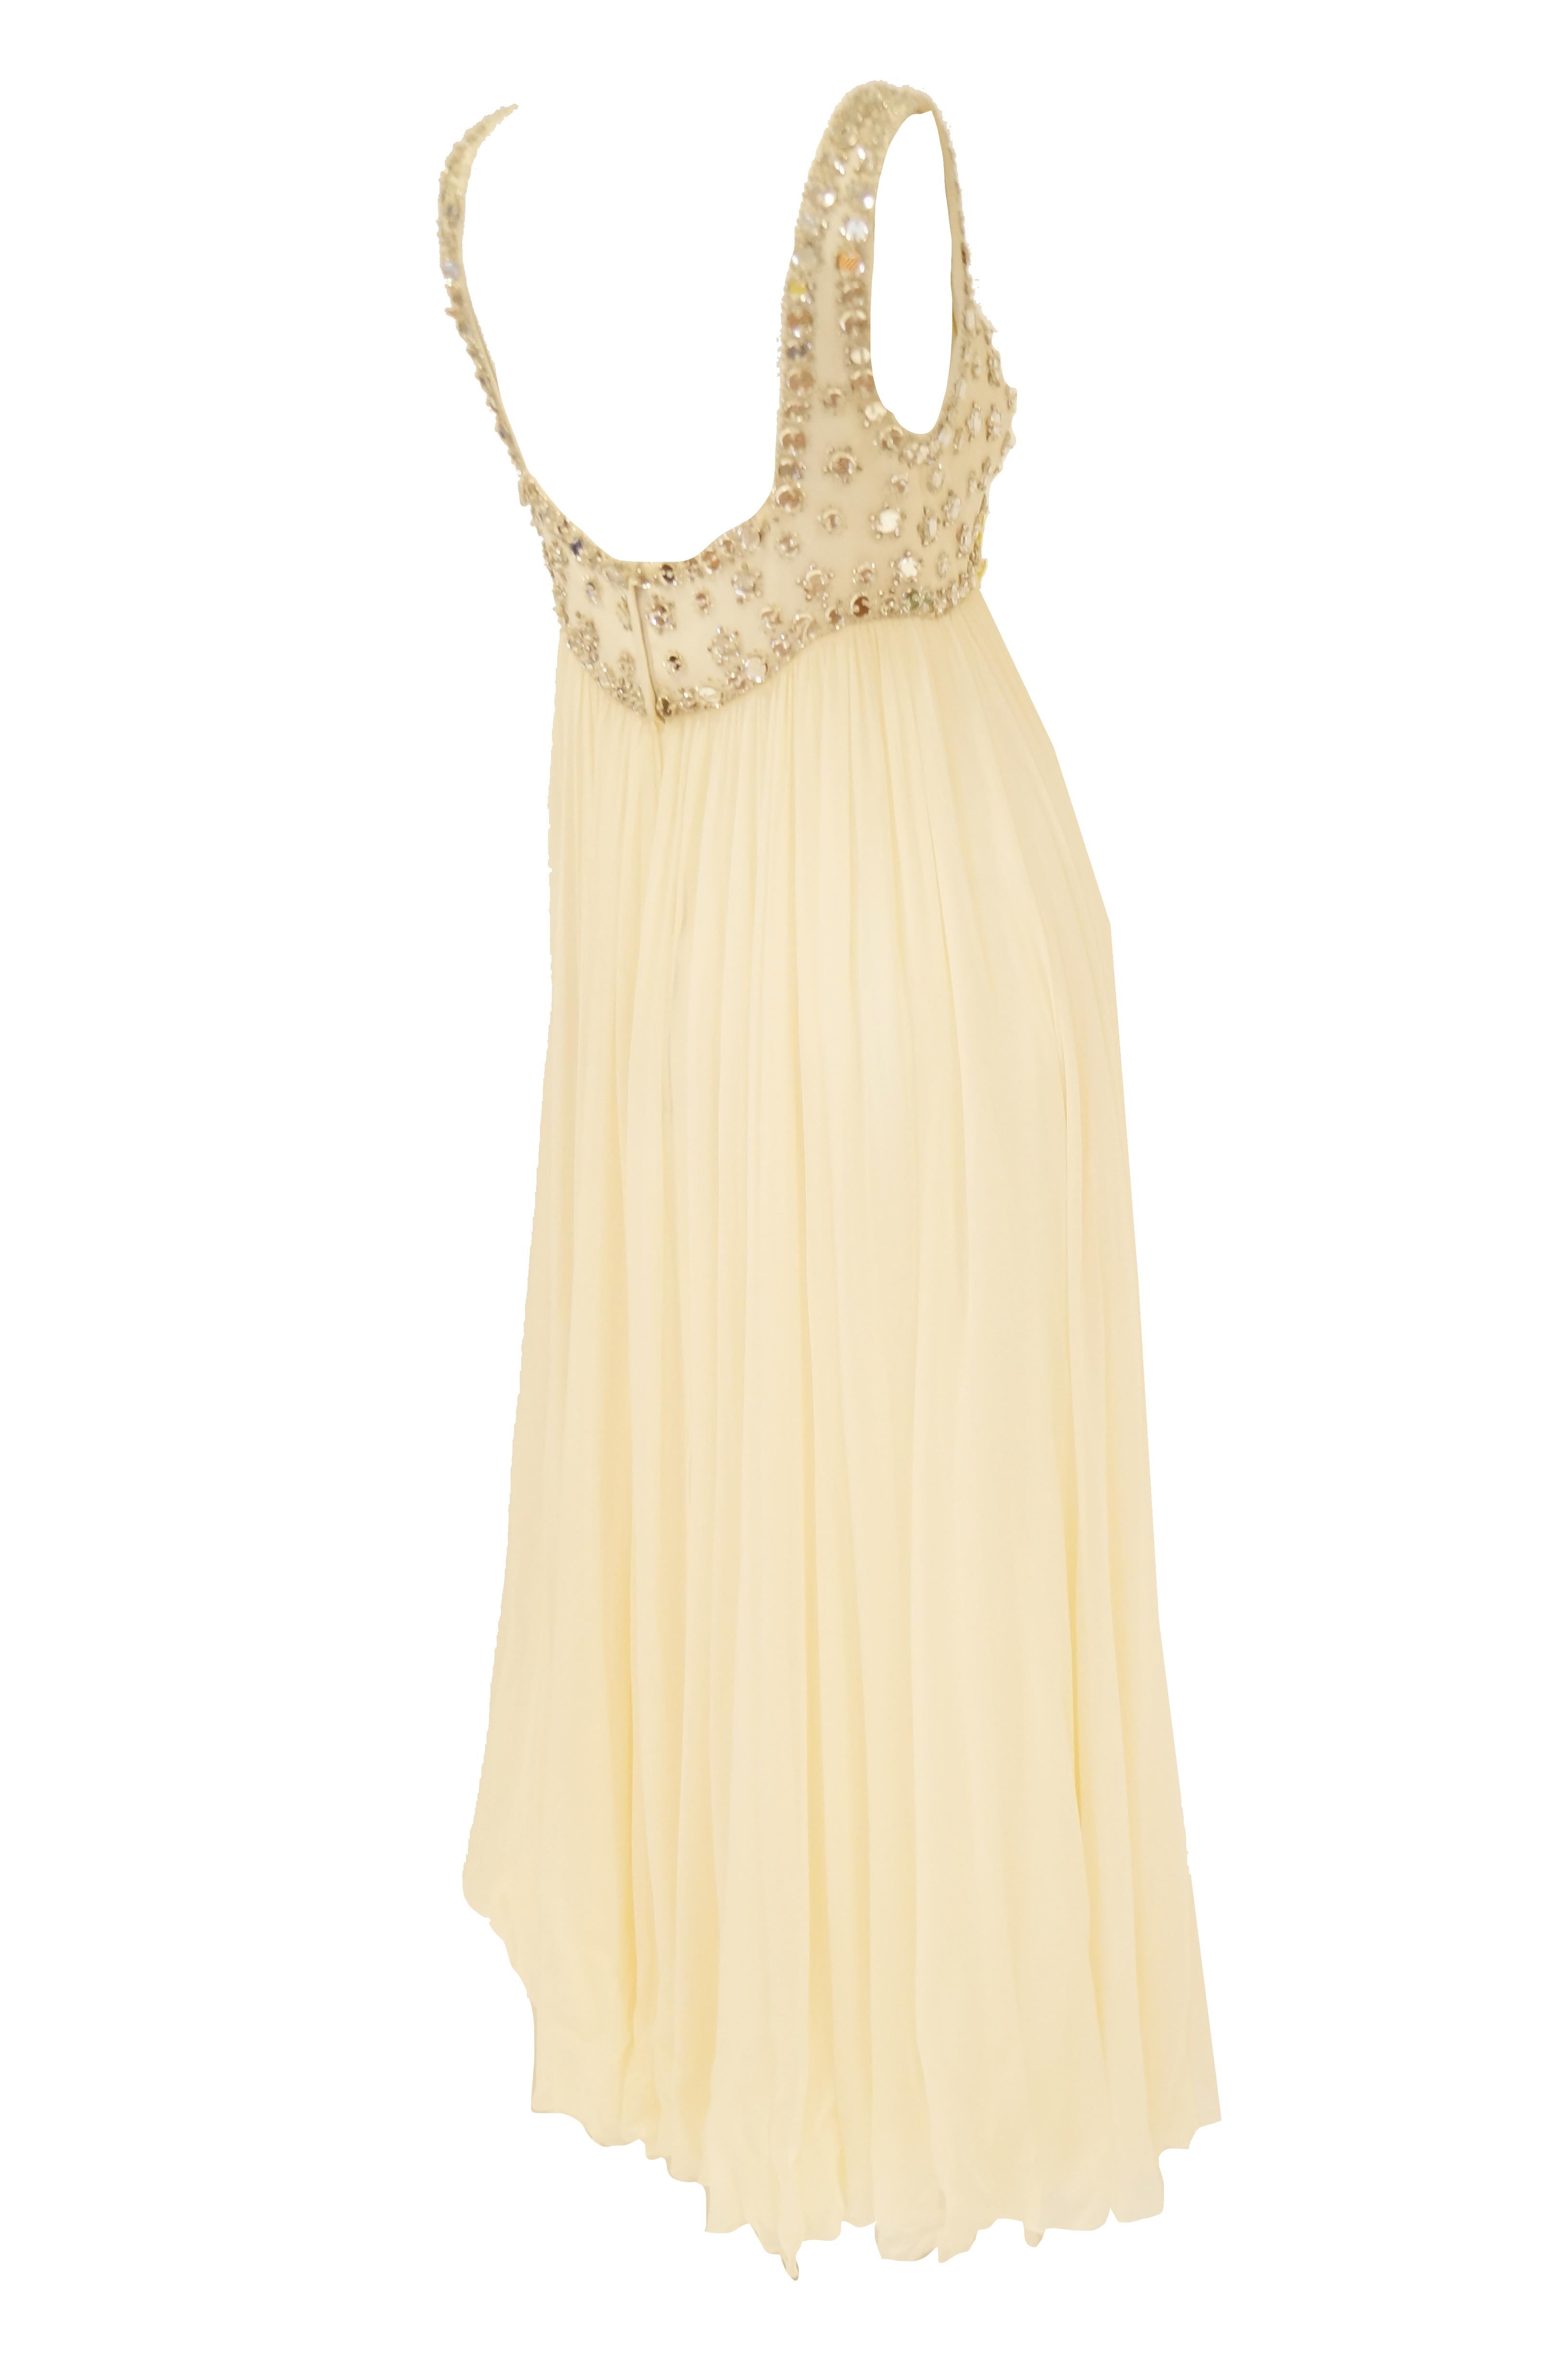  1960s Lillie Rubin Cream Dress with Neon Yellow Bow and Mirror Sequin Detail 2